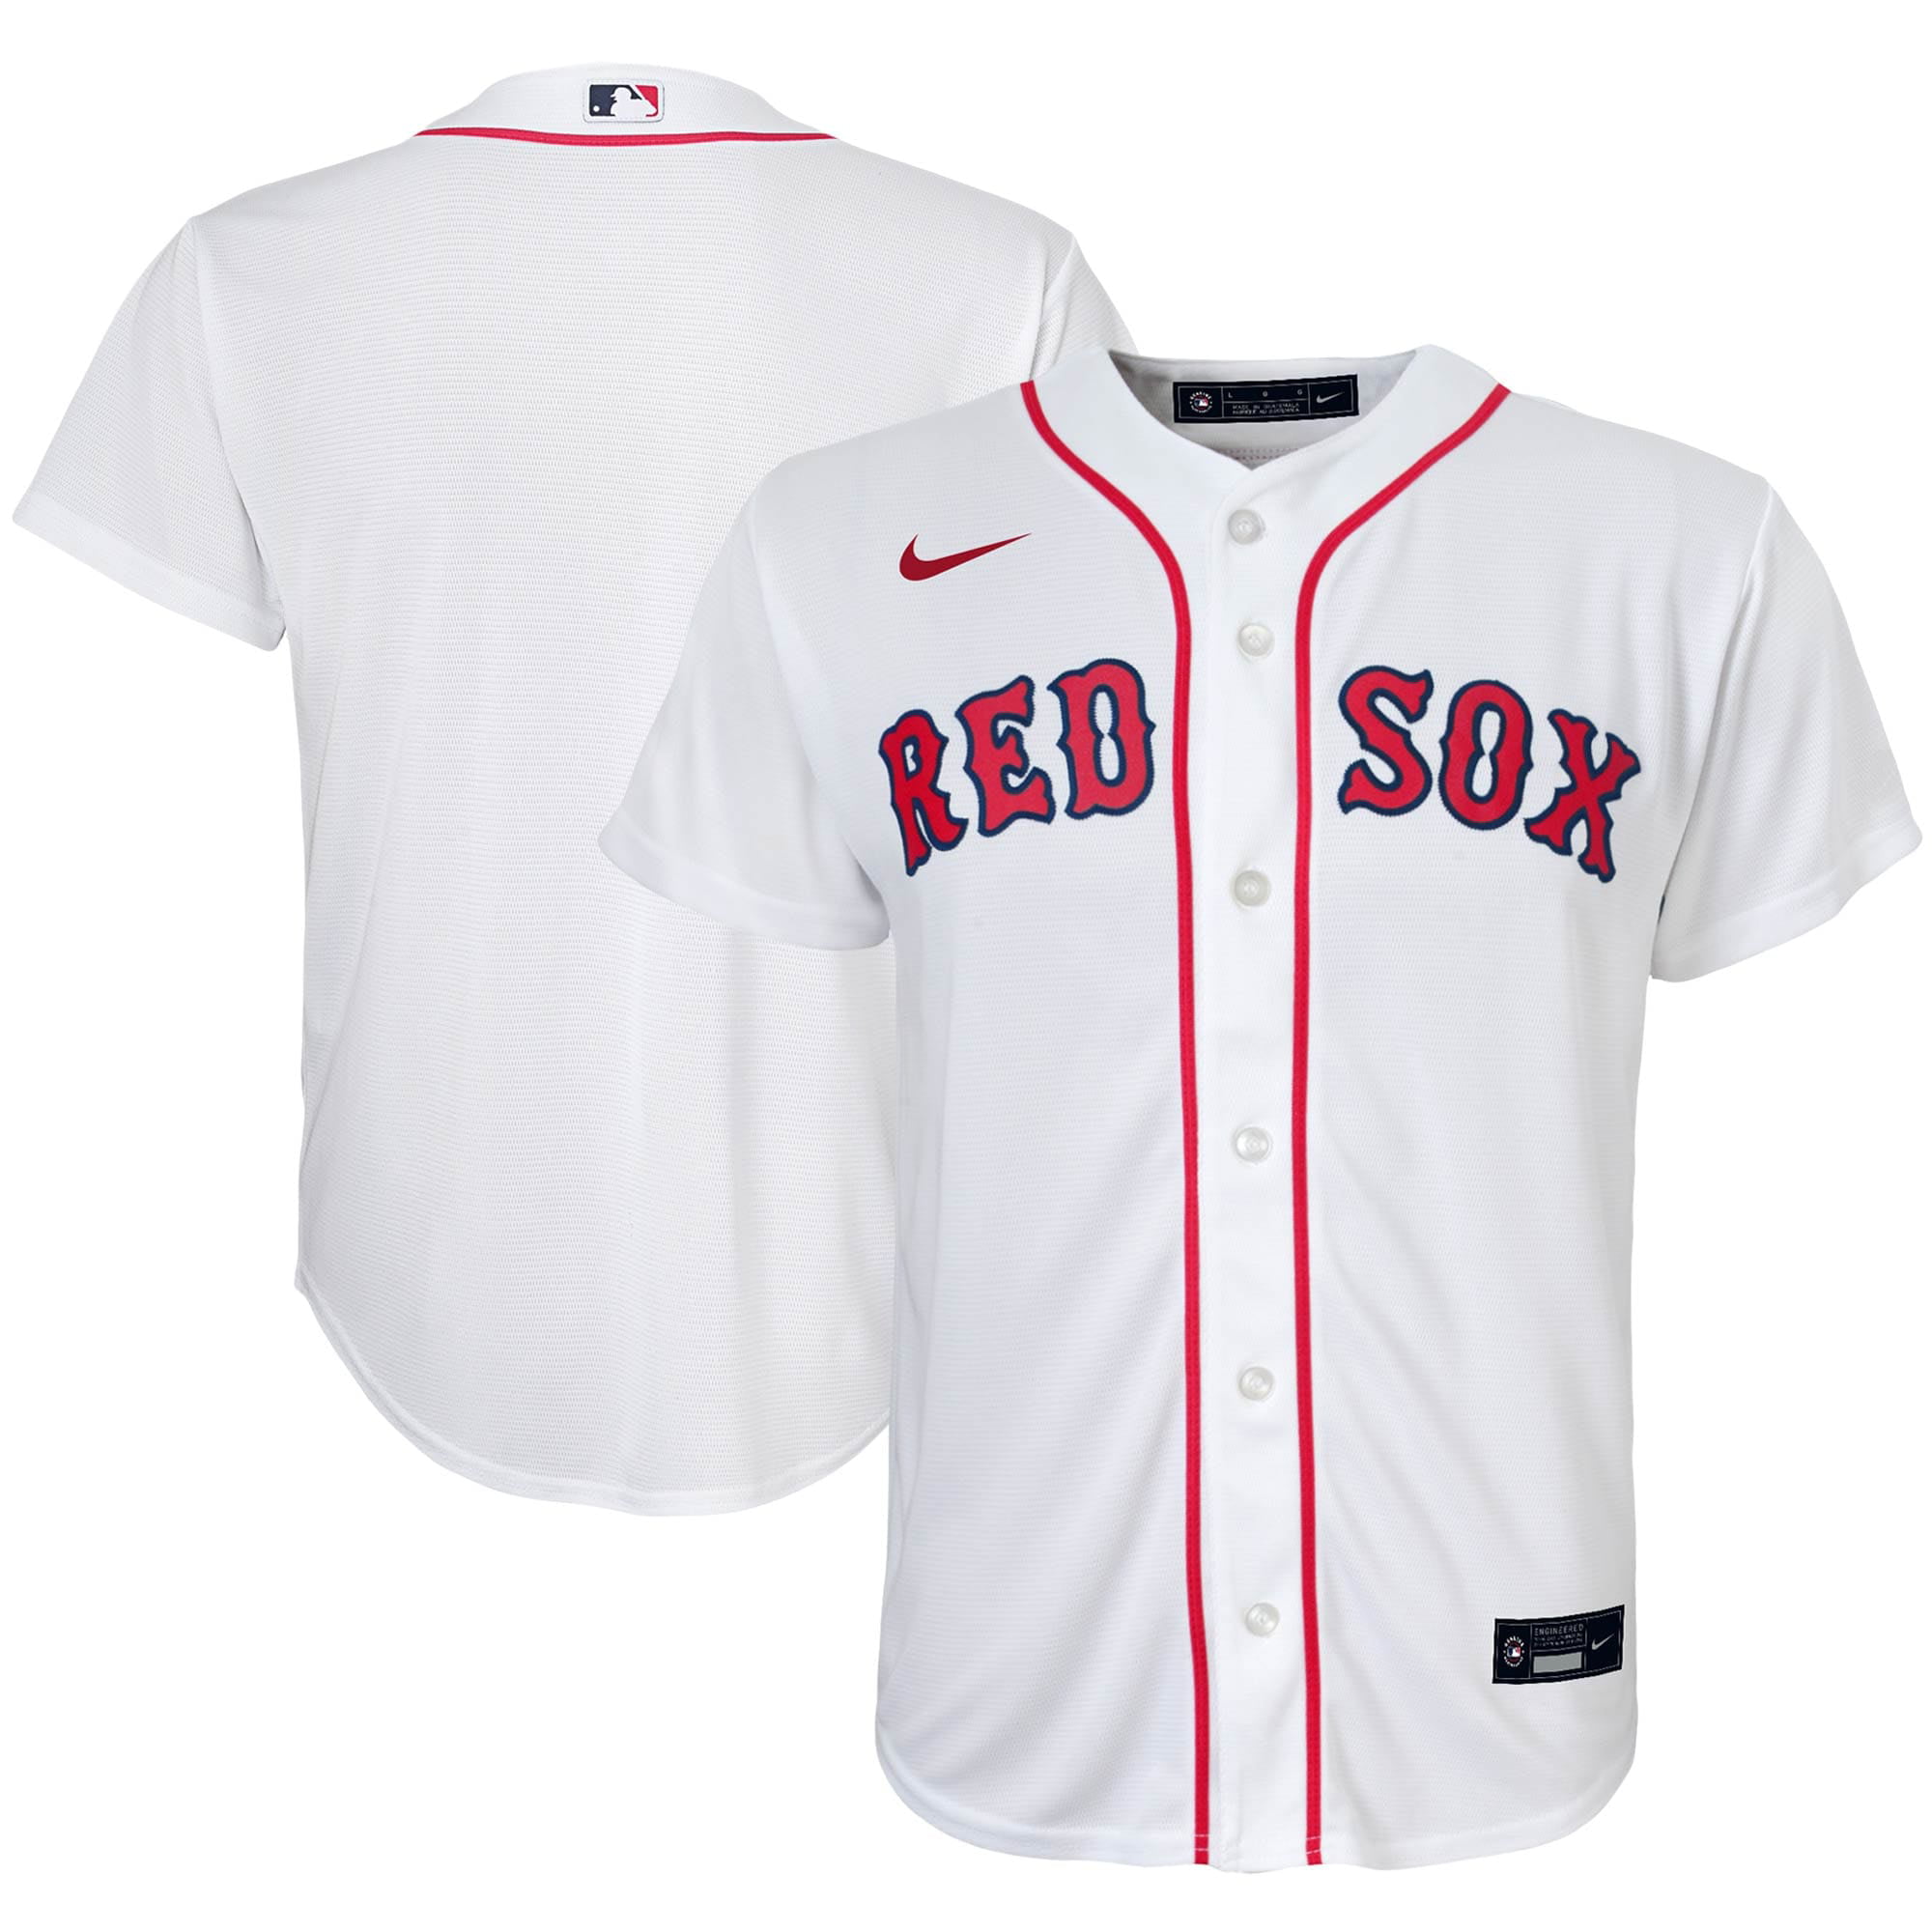 red sox nike jersey 2020